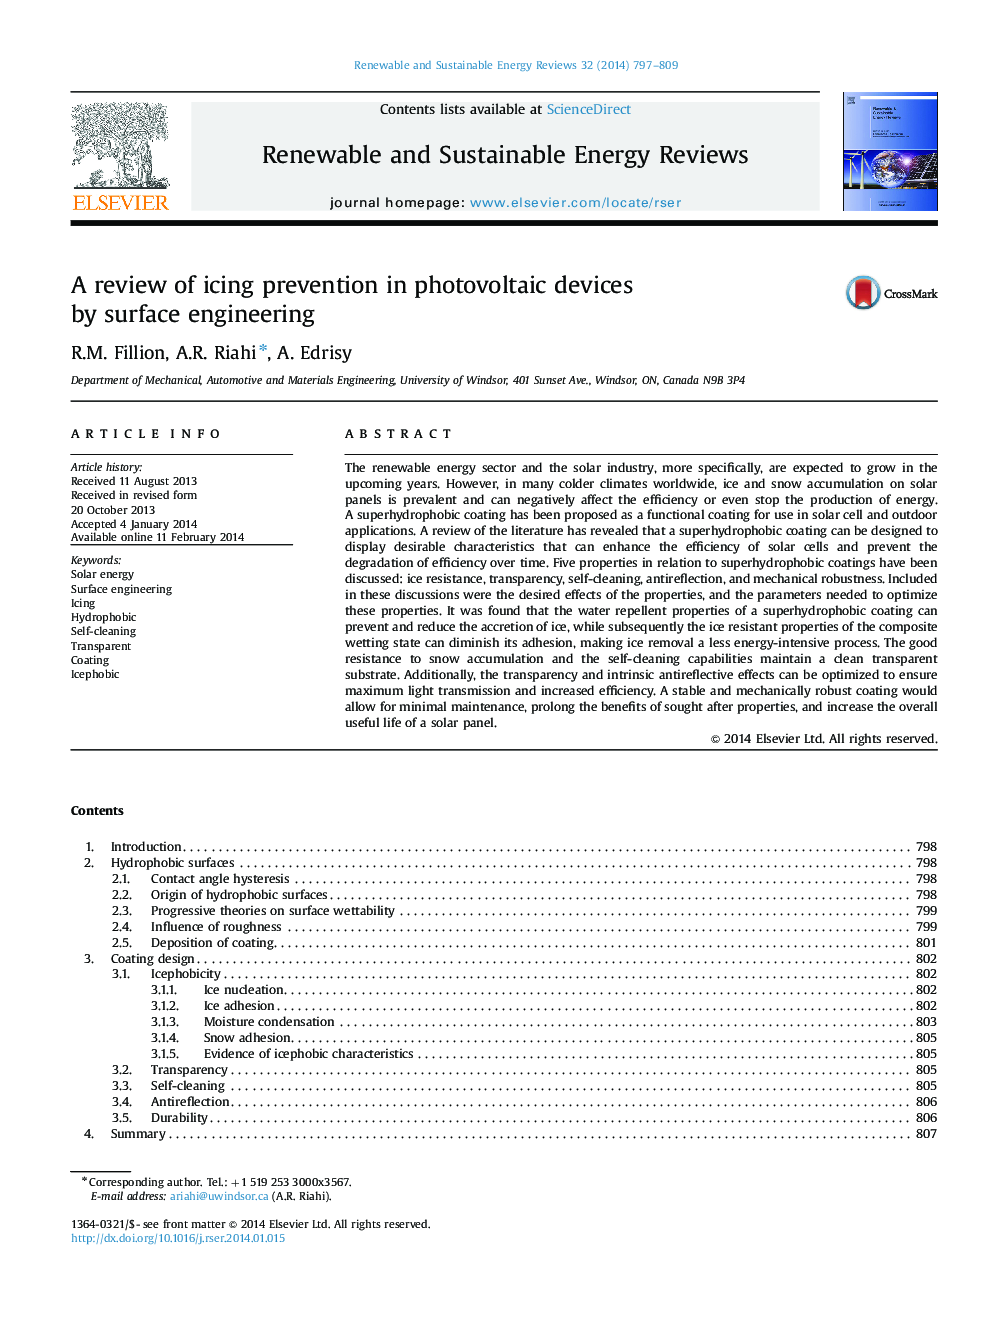 A review of icing prevention in photovoltaic devices by surface engineering